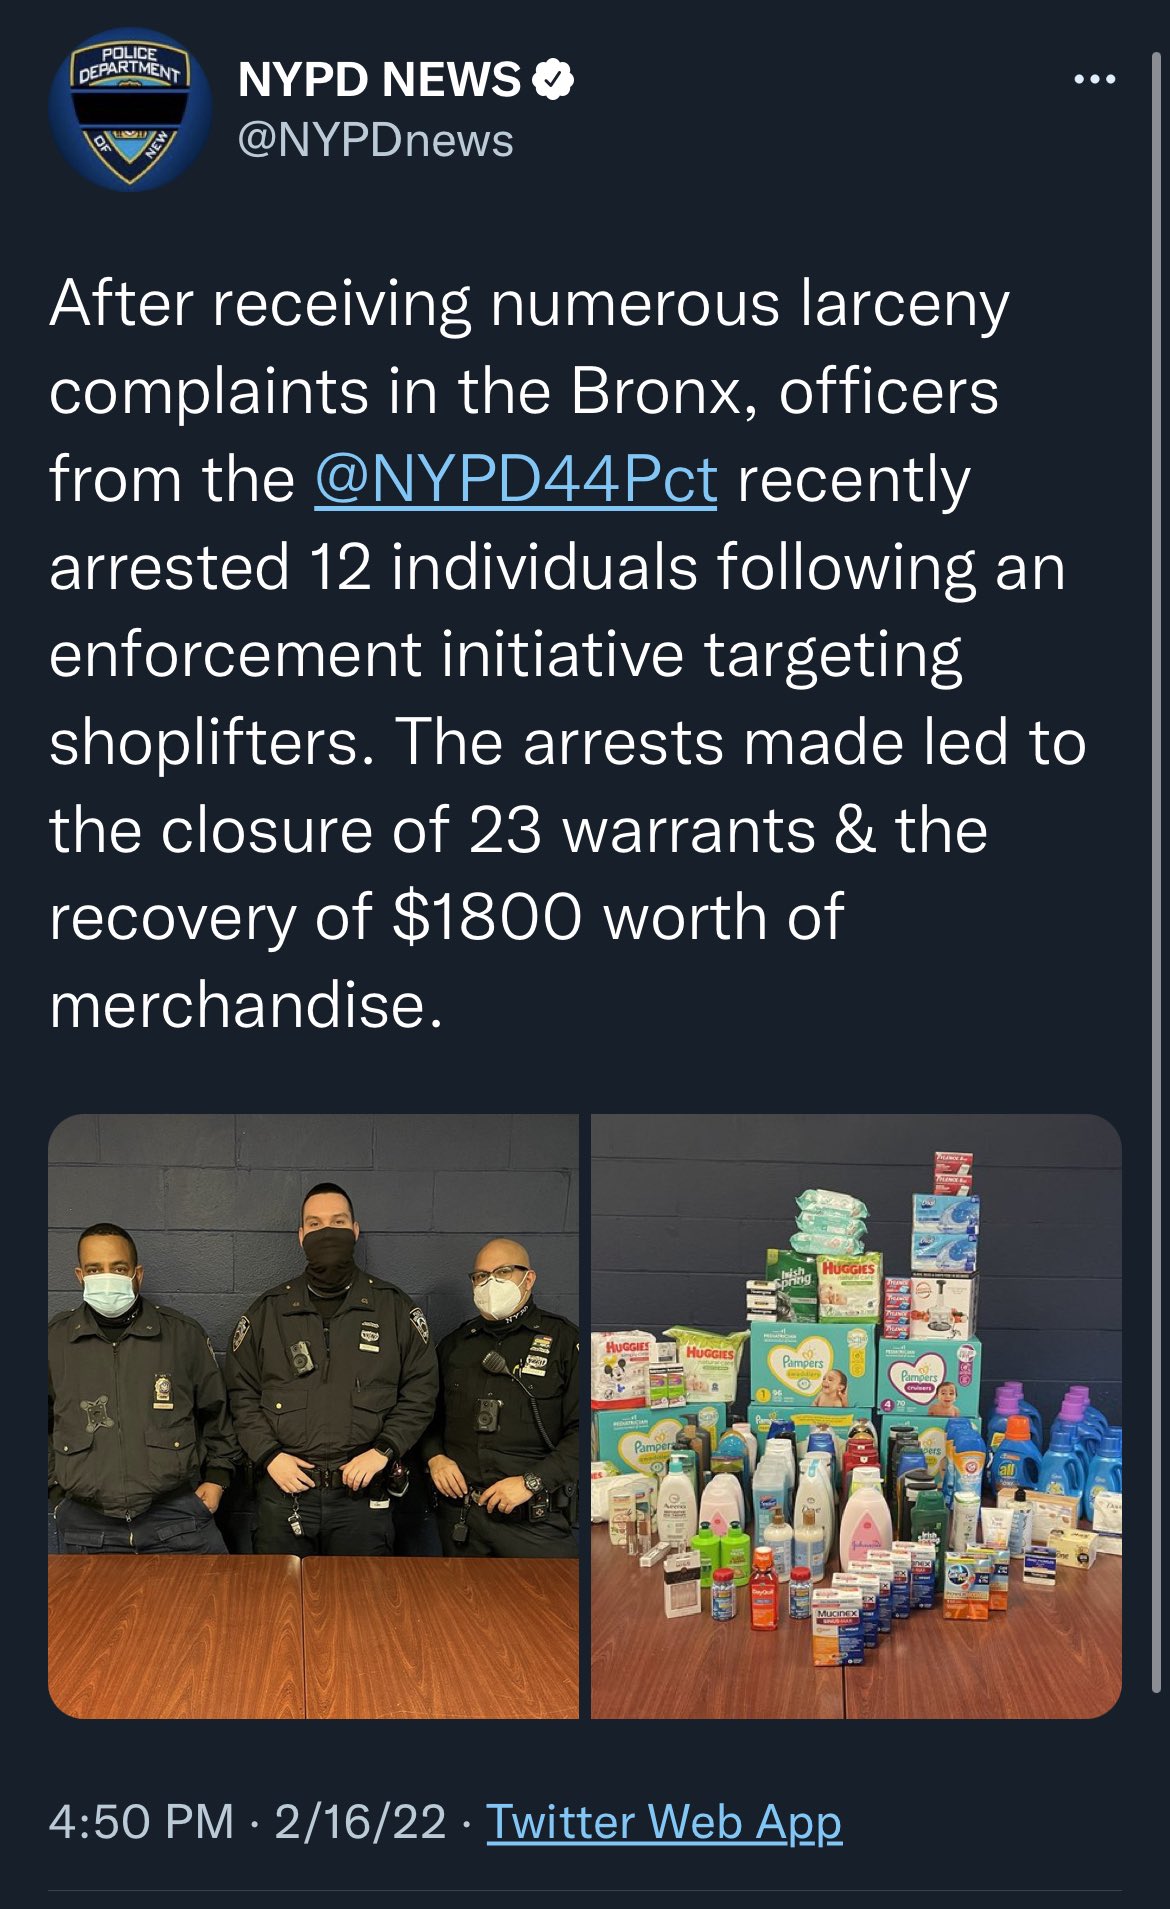 shoplifting meme - Police Department Nev Nypd News After receiving numerous larceny complaints in the Bronx, officers from the recently arrested 12 individuals ing an enforcement initiative targeting shoplifters. The arrests made led to the closure of 23 